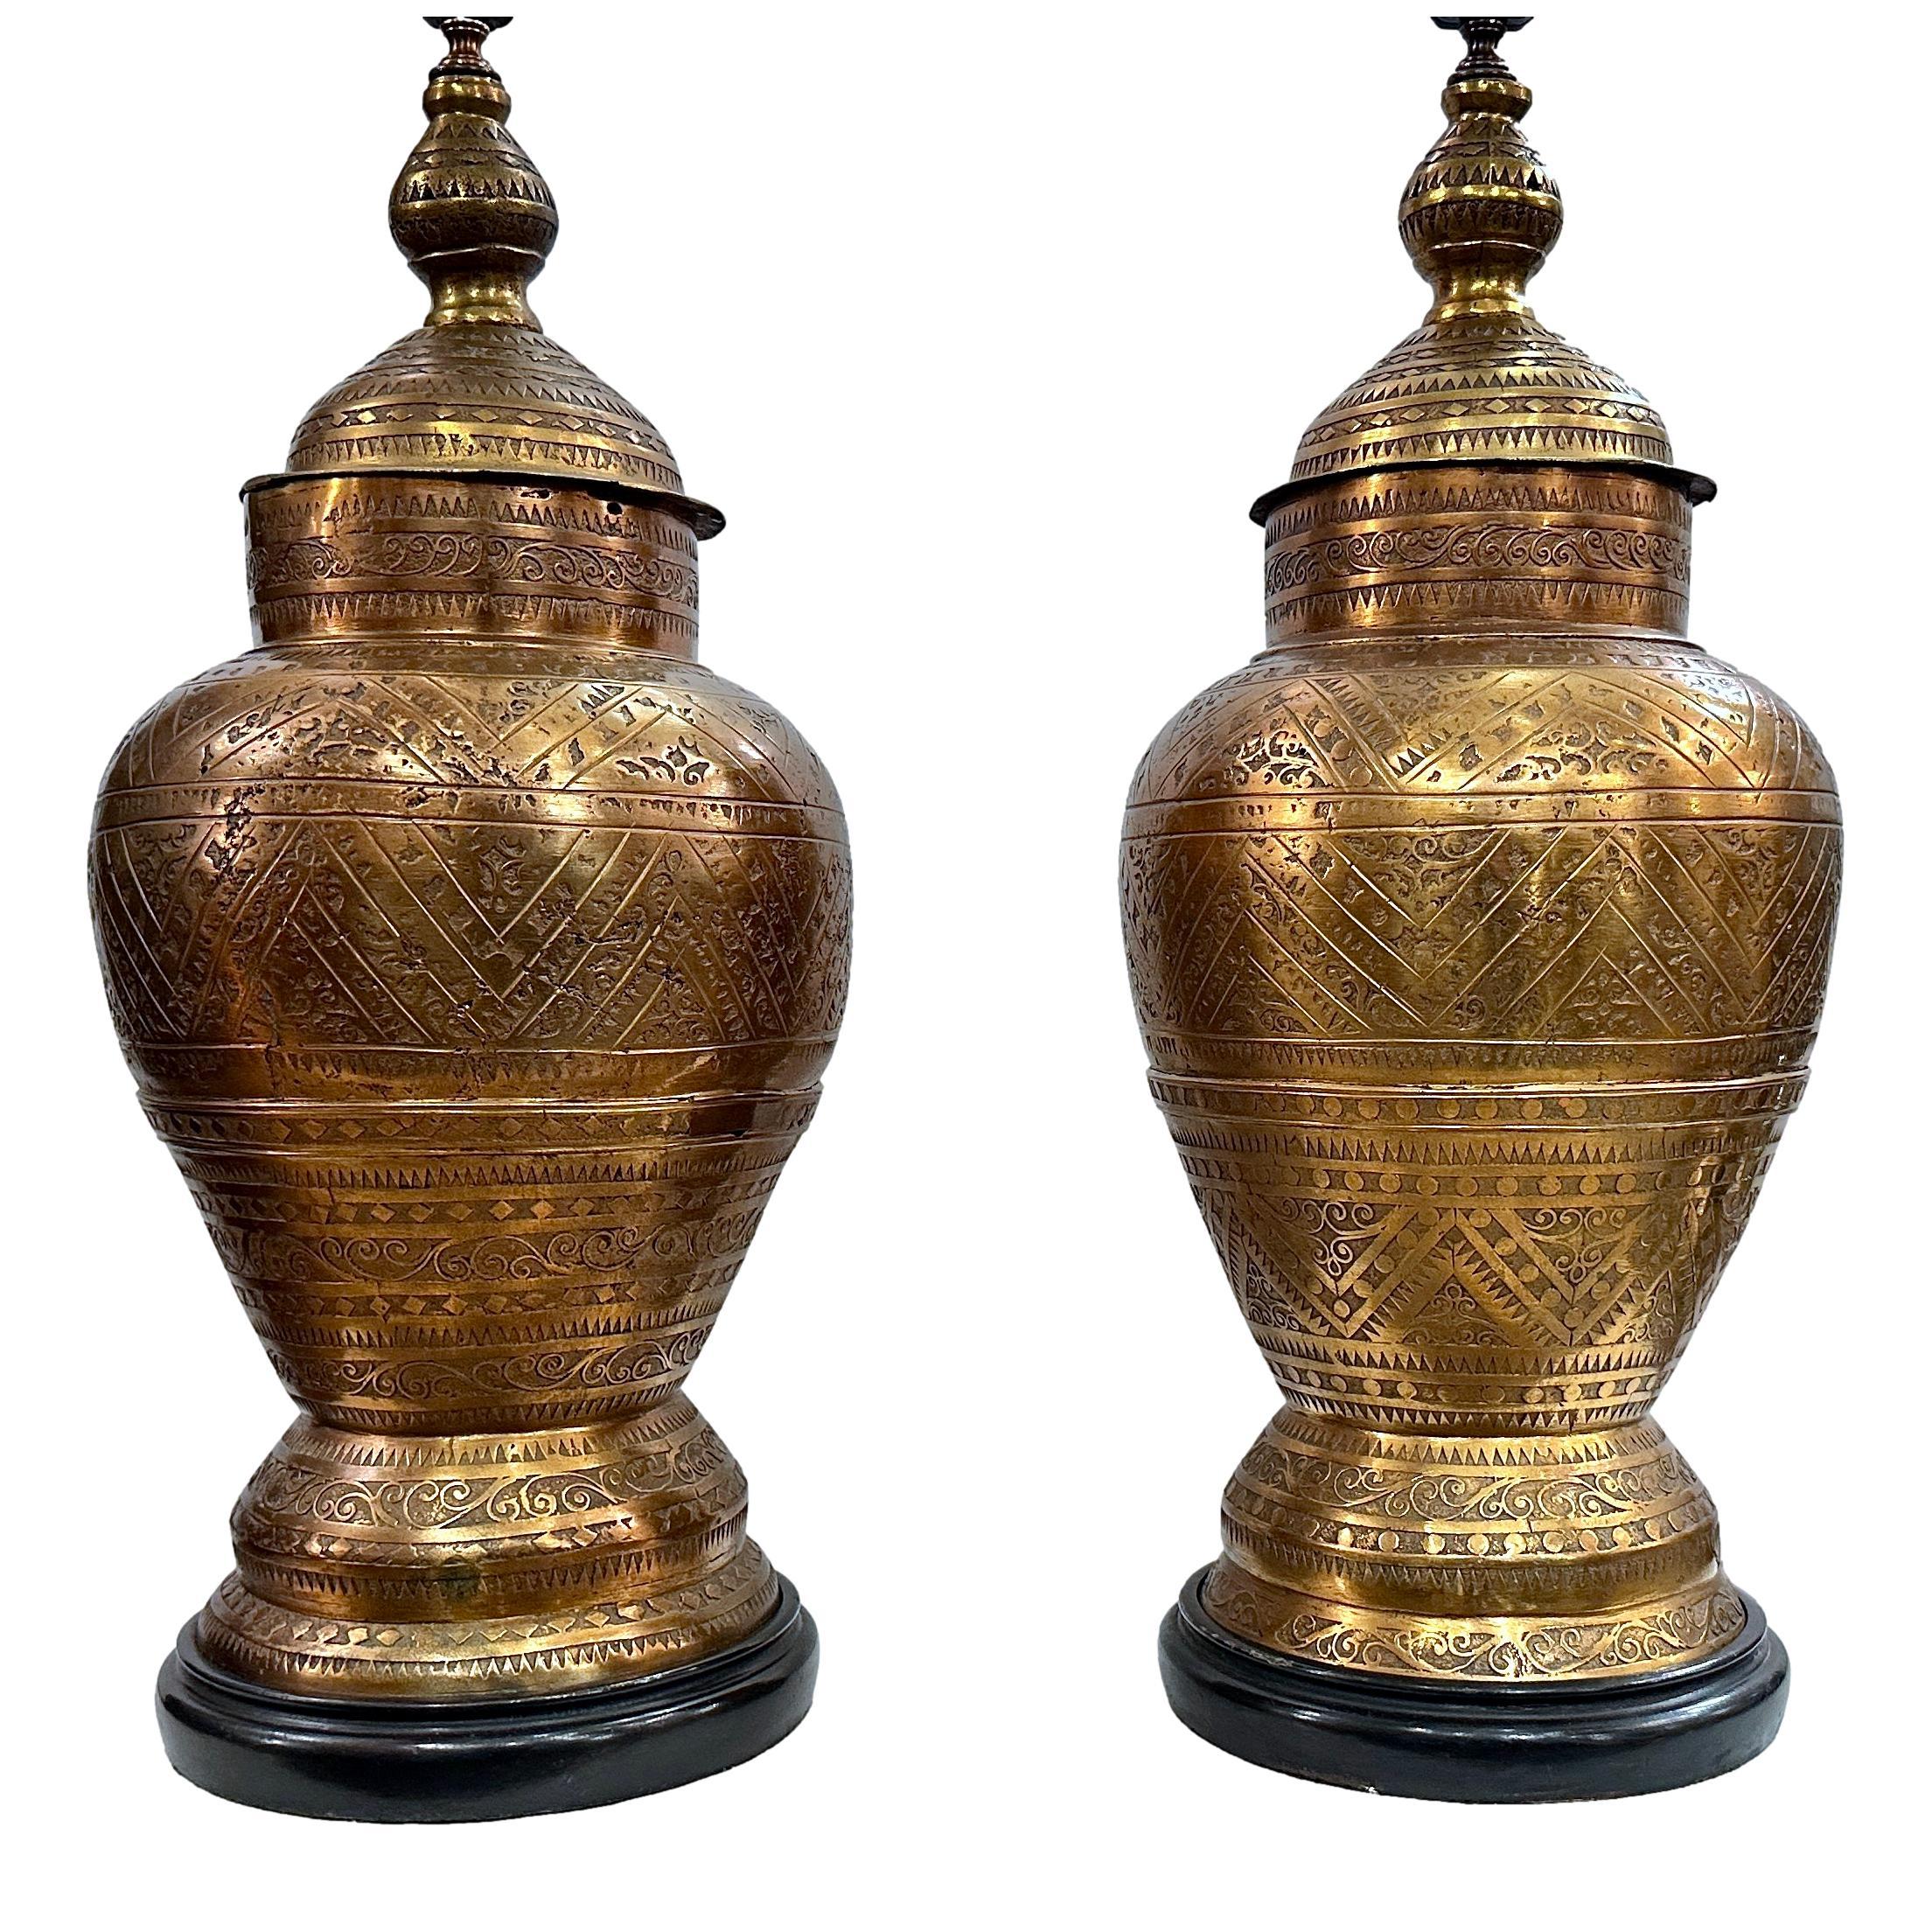 Pair of circa 1960's Moroccan etched and cast bronze lamps with original patina. 

Measurements:
Height of body: 27